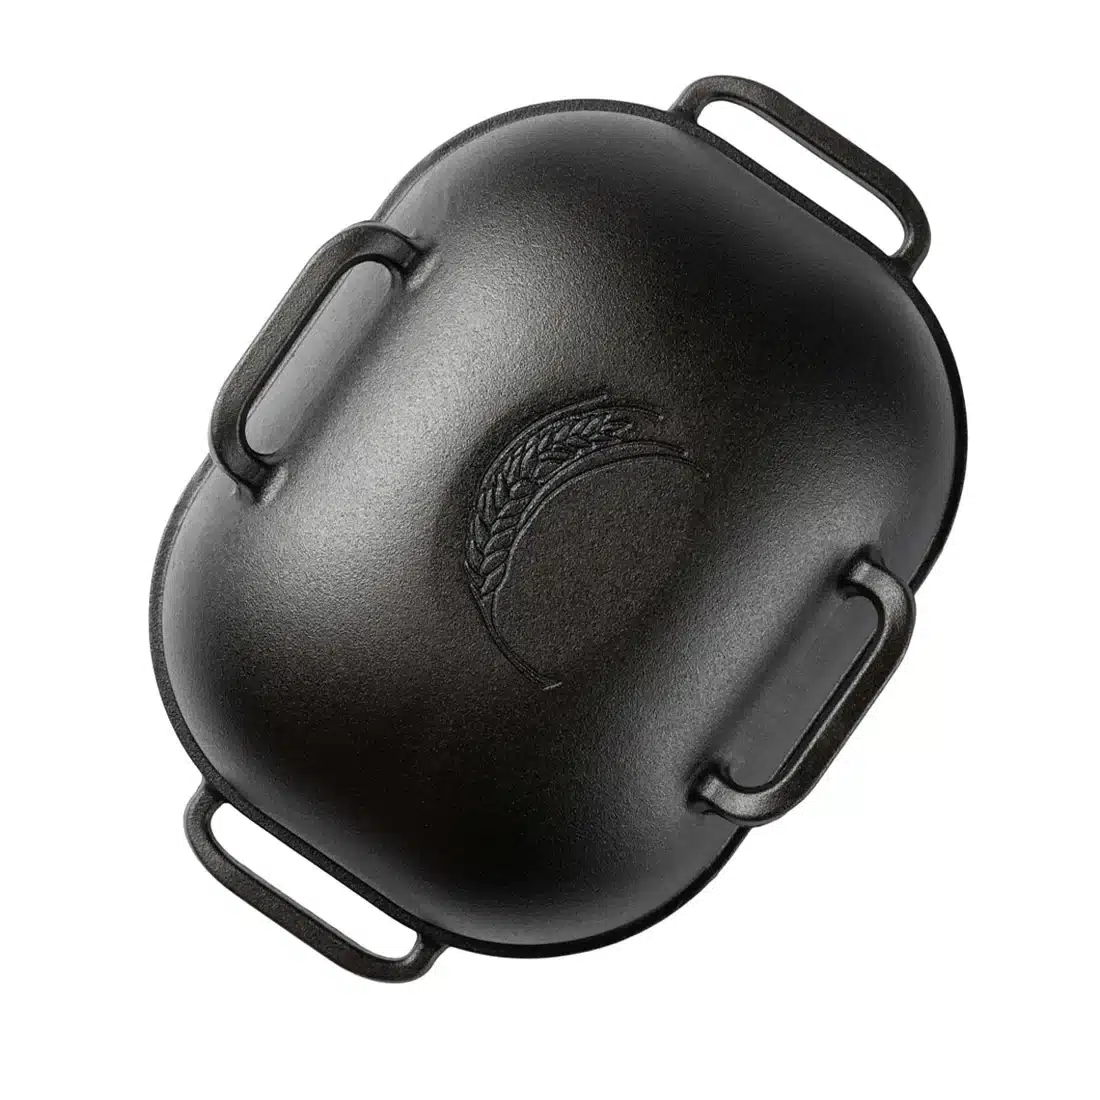 Challenger Breadware introduces Cast Iron Care Kit